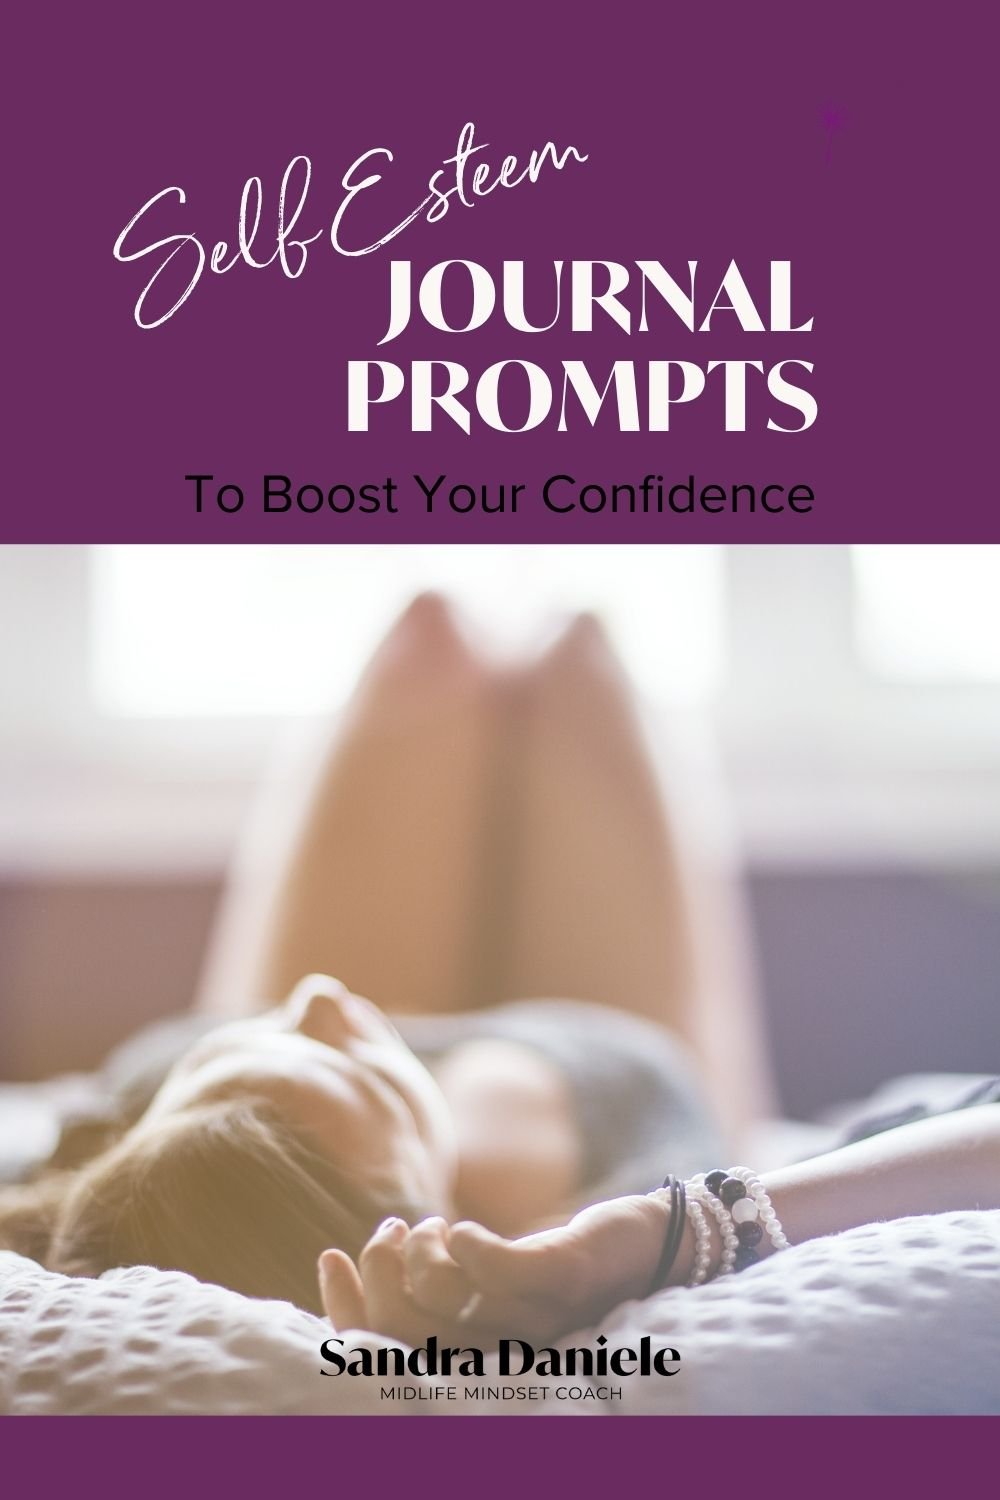 Self-Esteem Journal Prompts to Boost Your Self-Confidence